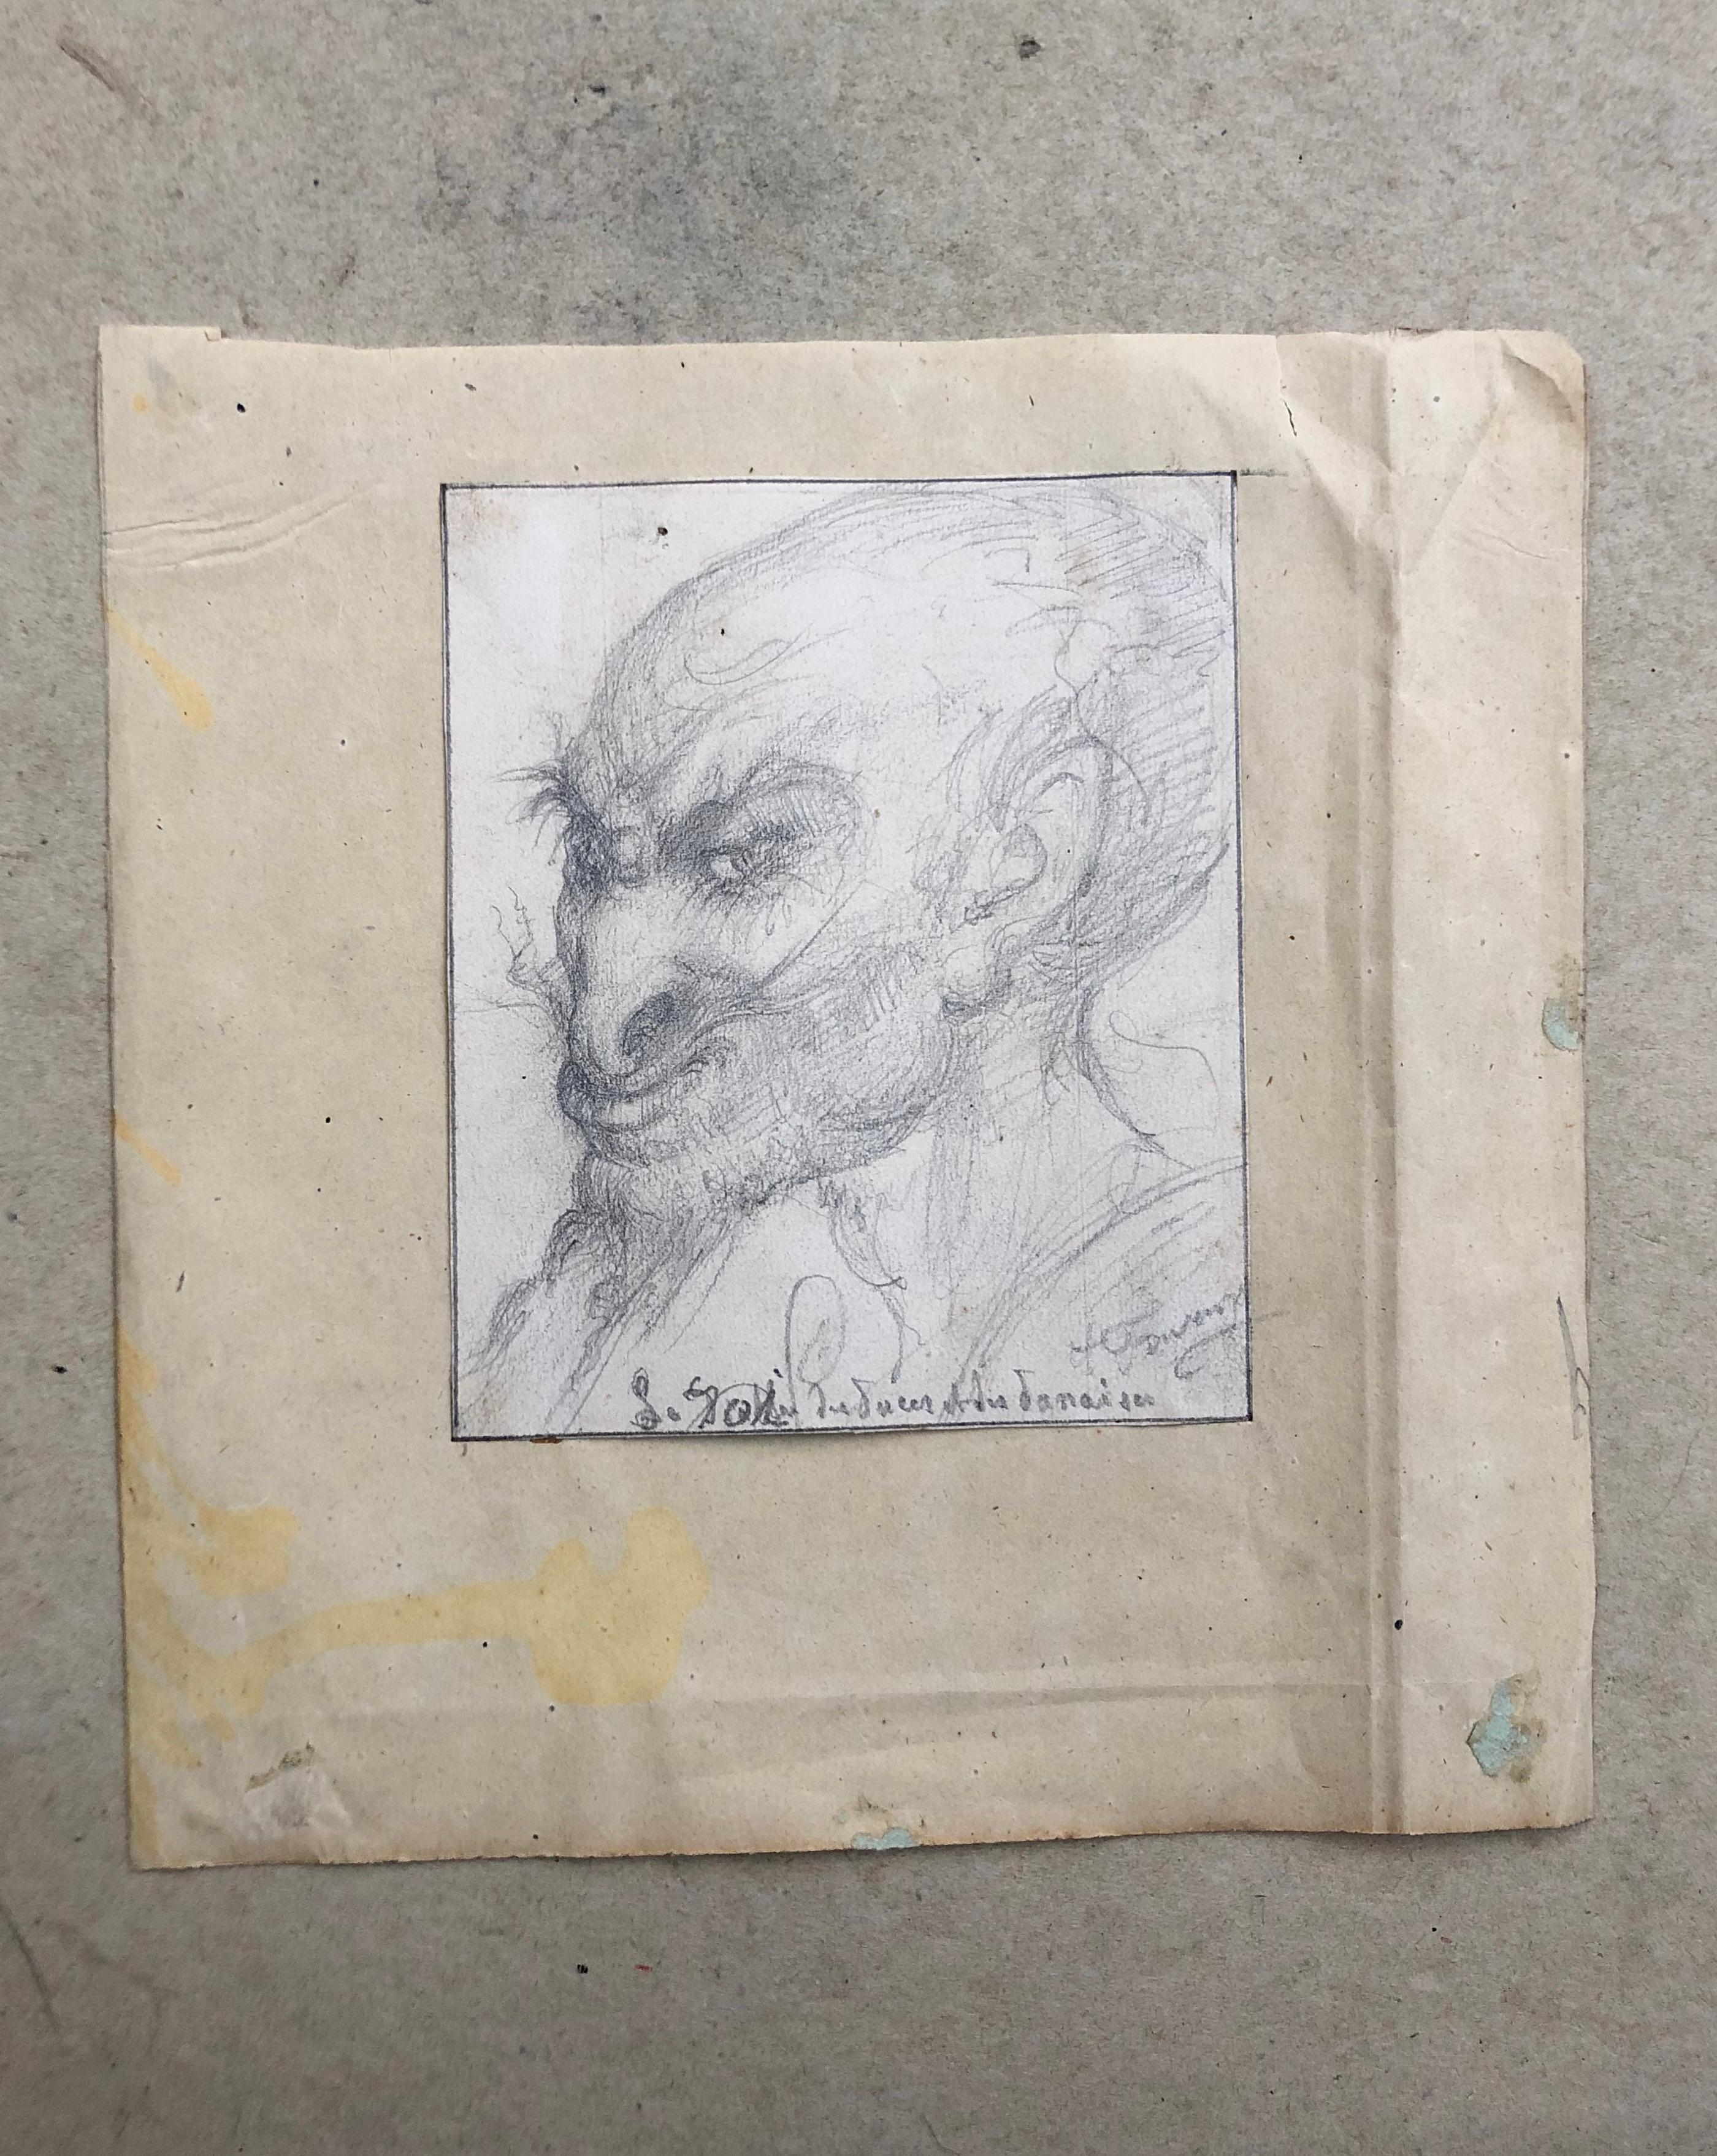 Demon portrait.
Lead pencil drawing.
Annotations and signature to decipher.
Paper partially glued to paper.
Very small dirt.
13.5 x 11.5 cm